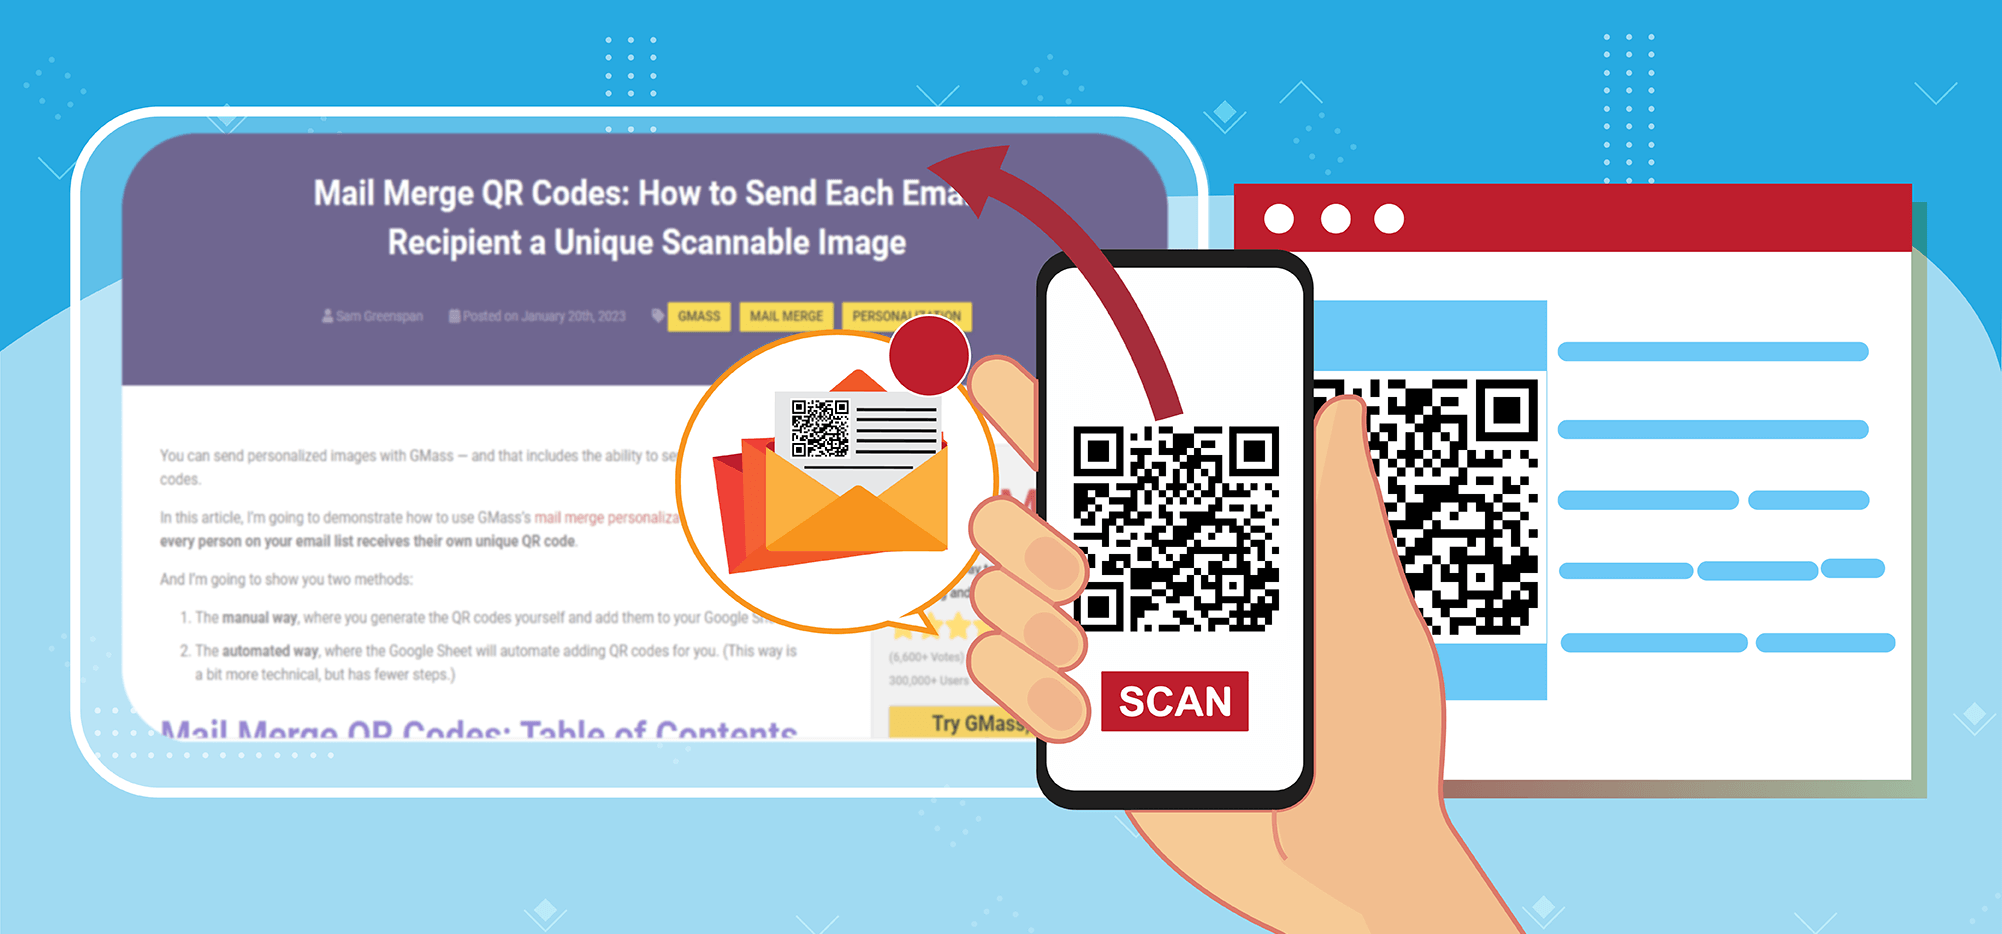 Mail Merge QR Codes: How to Send Each Email Recipient a Unique Scannable Image